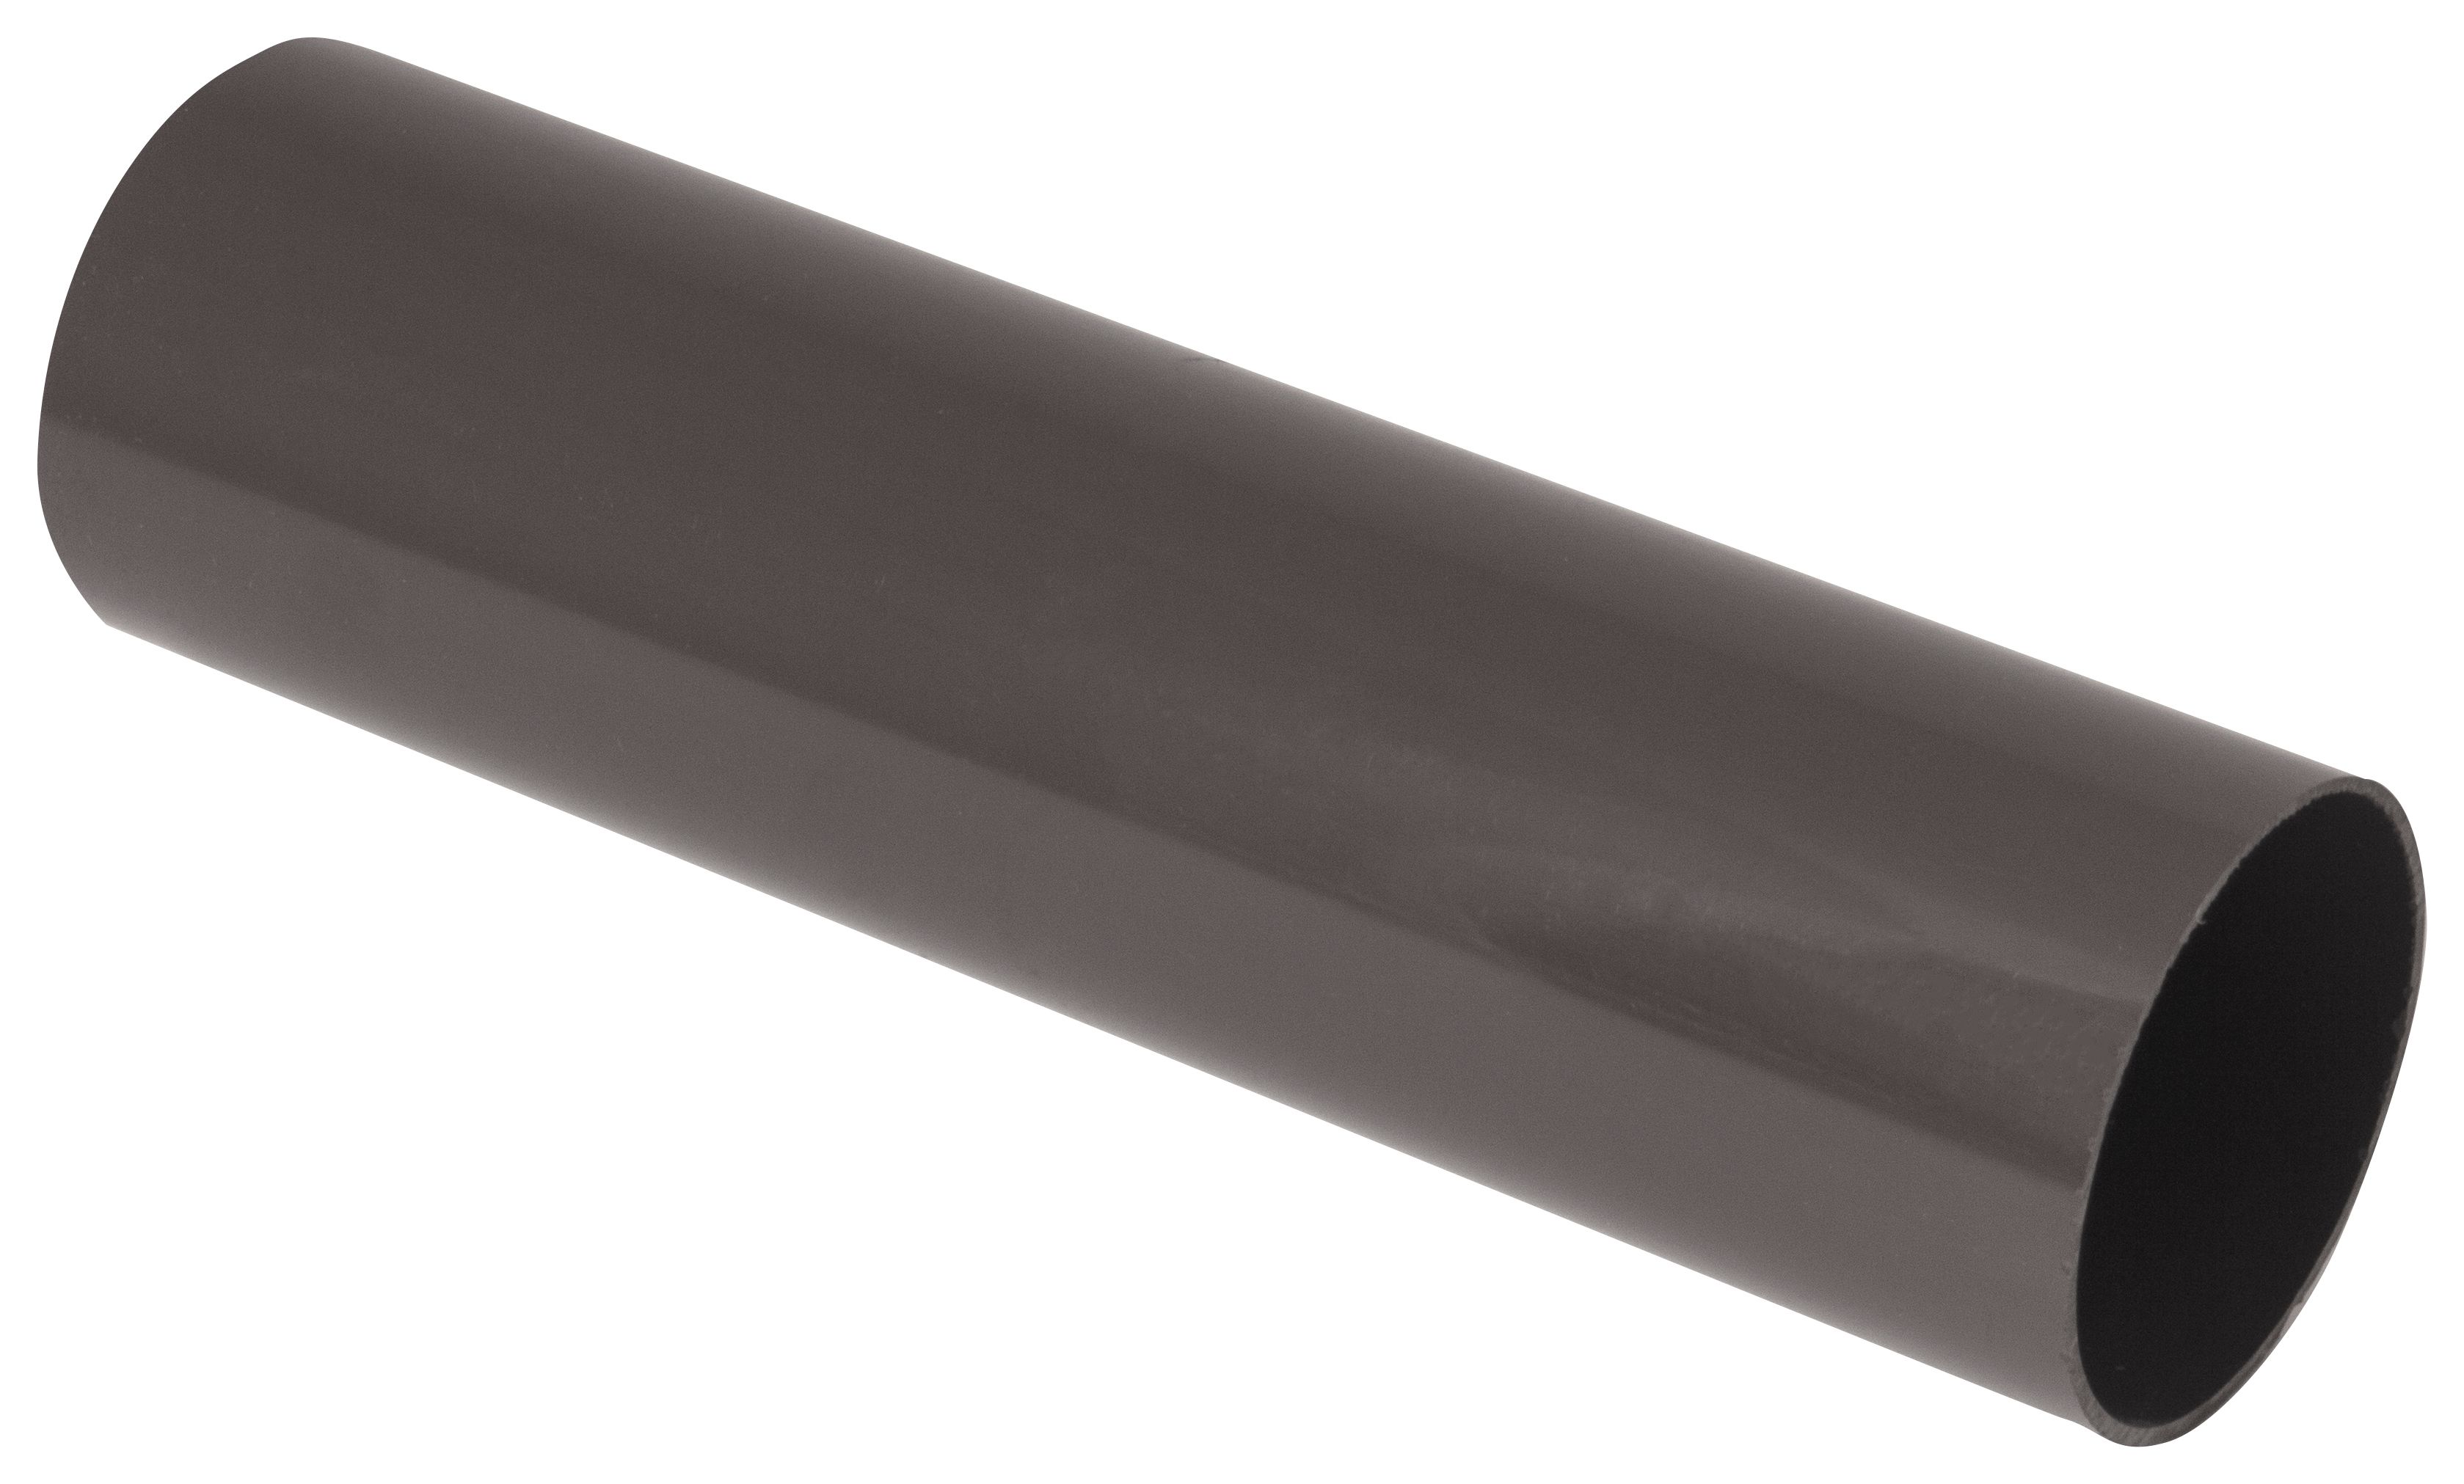 Image of FloPlast 68mm Round Line Downpipe - Anthracite Grey 2.5m